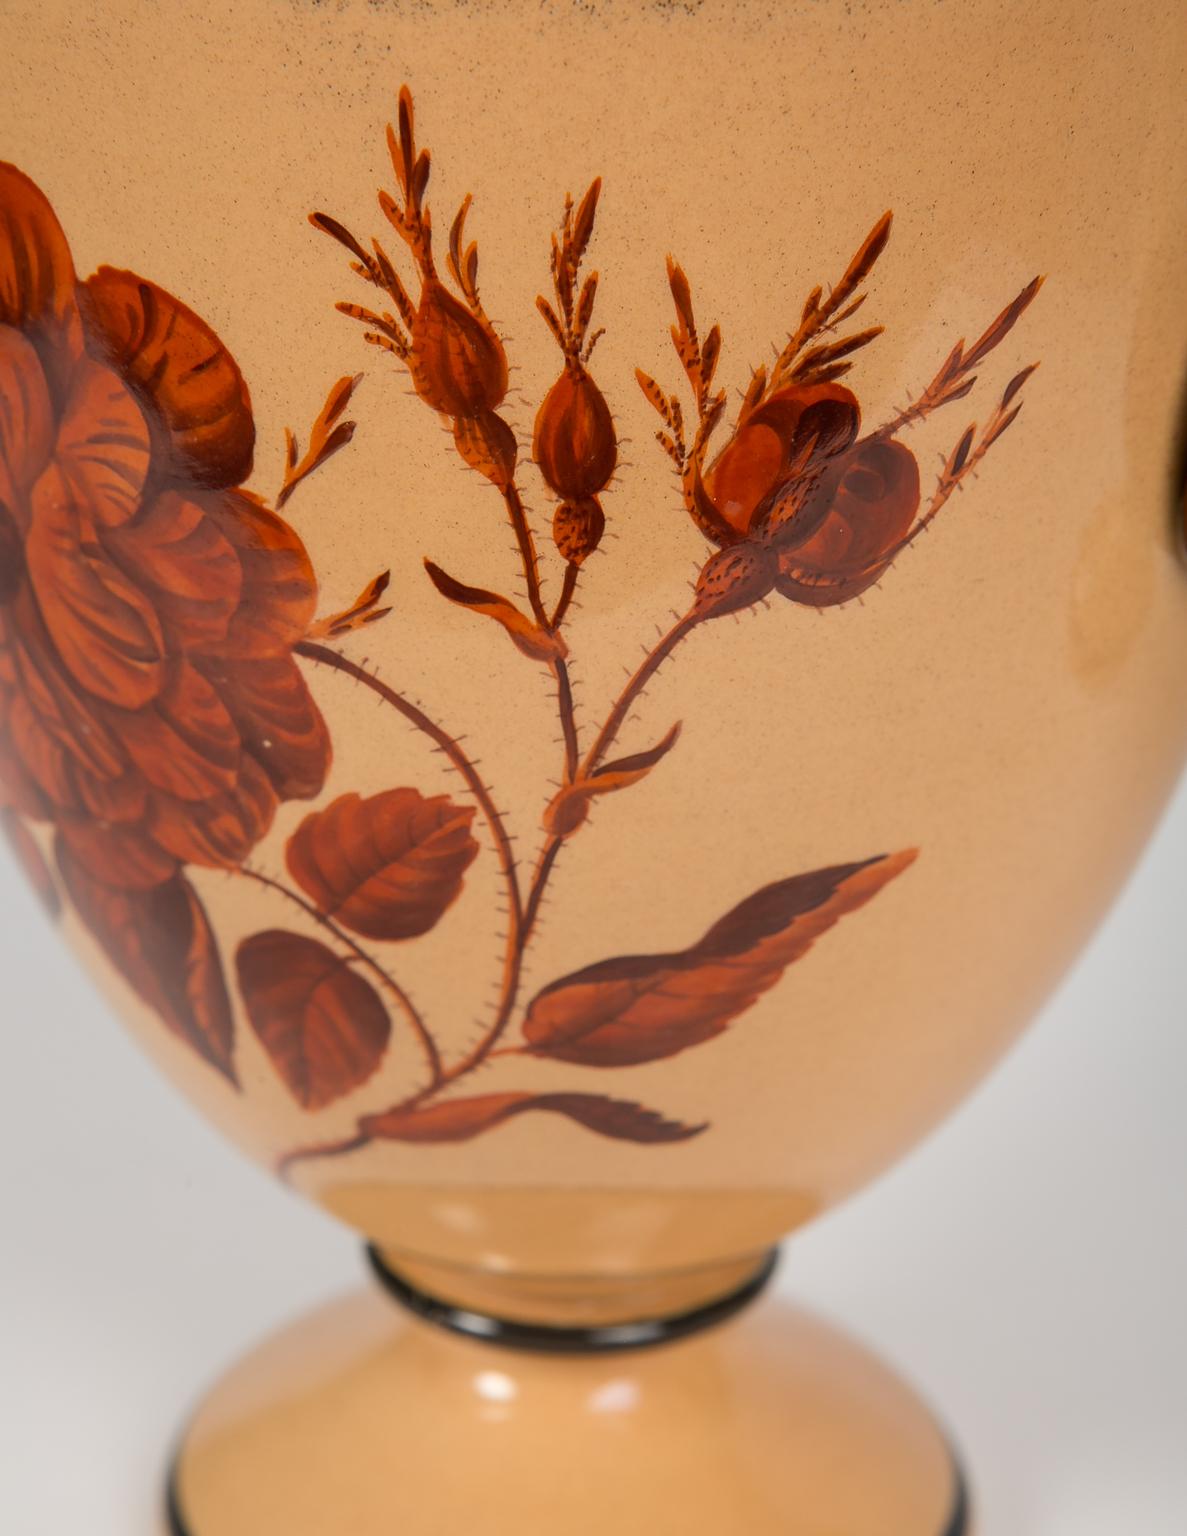 A pair of neoclassical vases with large red flowers and Greek key decoration. The large red flowers are set on a beautiful chalcedony background. These outstanding vases attributed to the Davenport factory in England were made in the early 19th